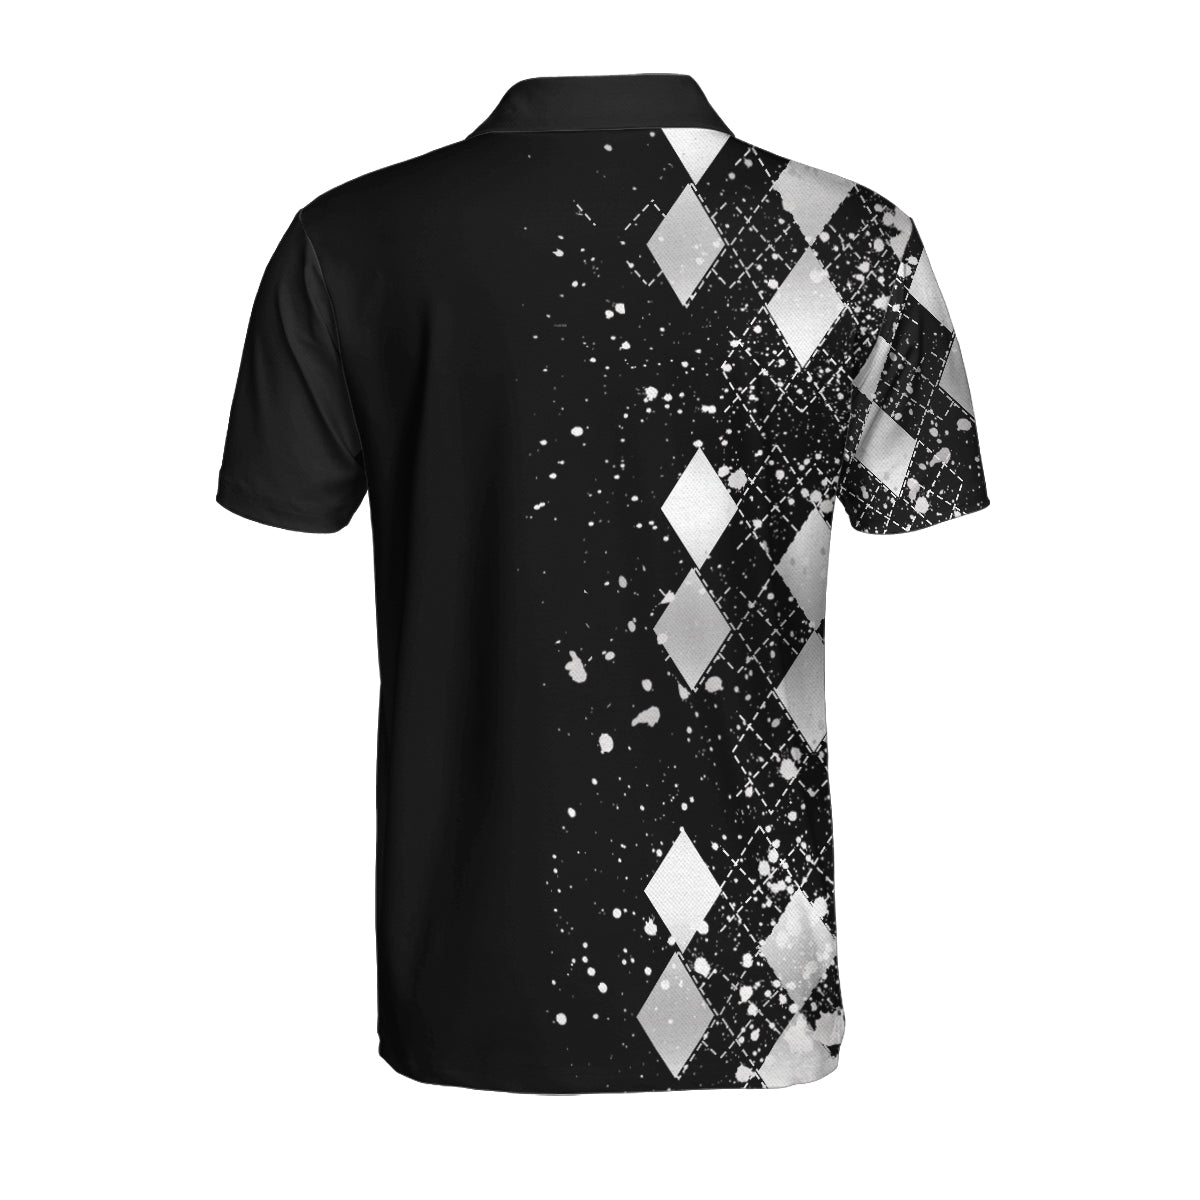 Silver Bowling Polo Shirt/ Black And Silver Argyle Pattern Bowling Shirt For Men Coolspod